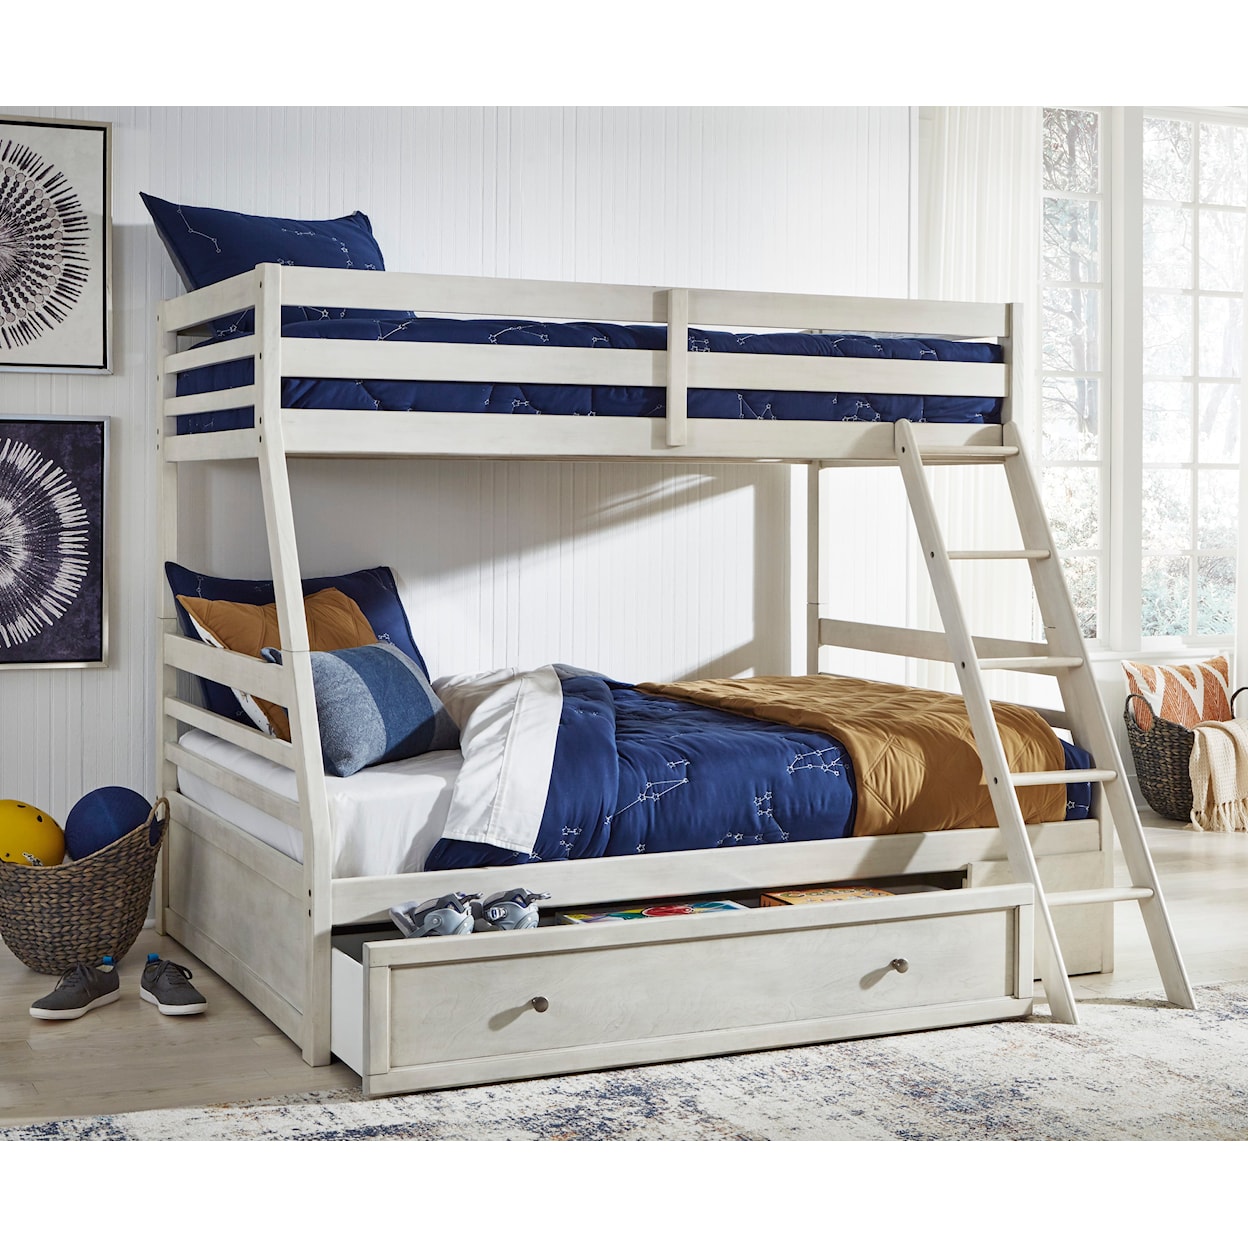 Ashley Furniture Signature Design Robbinsdale Twin/Full Bunk with Storage